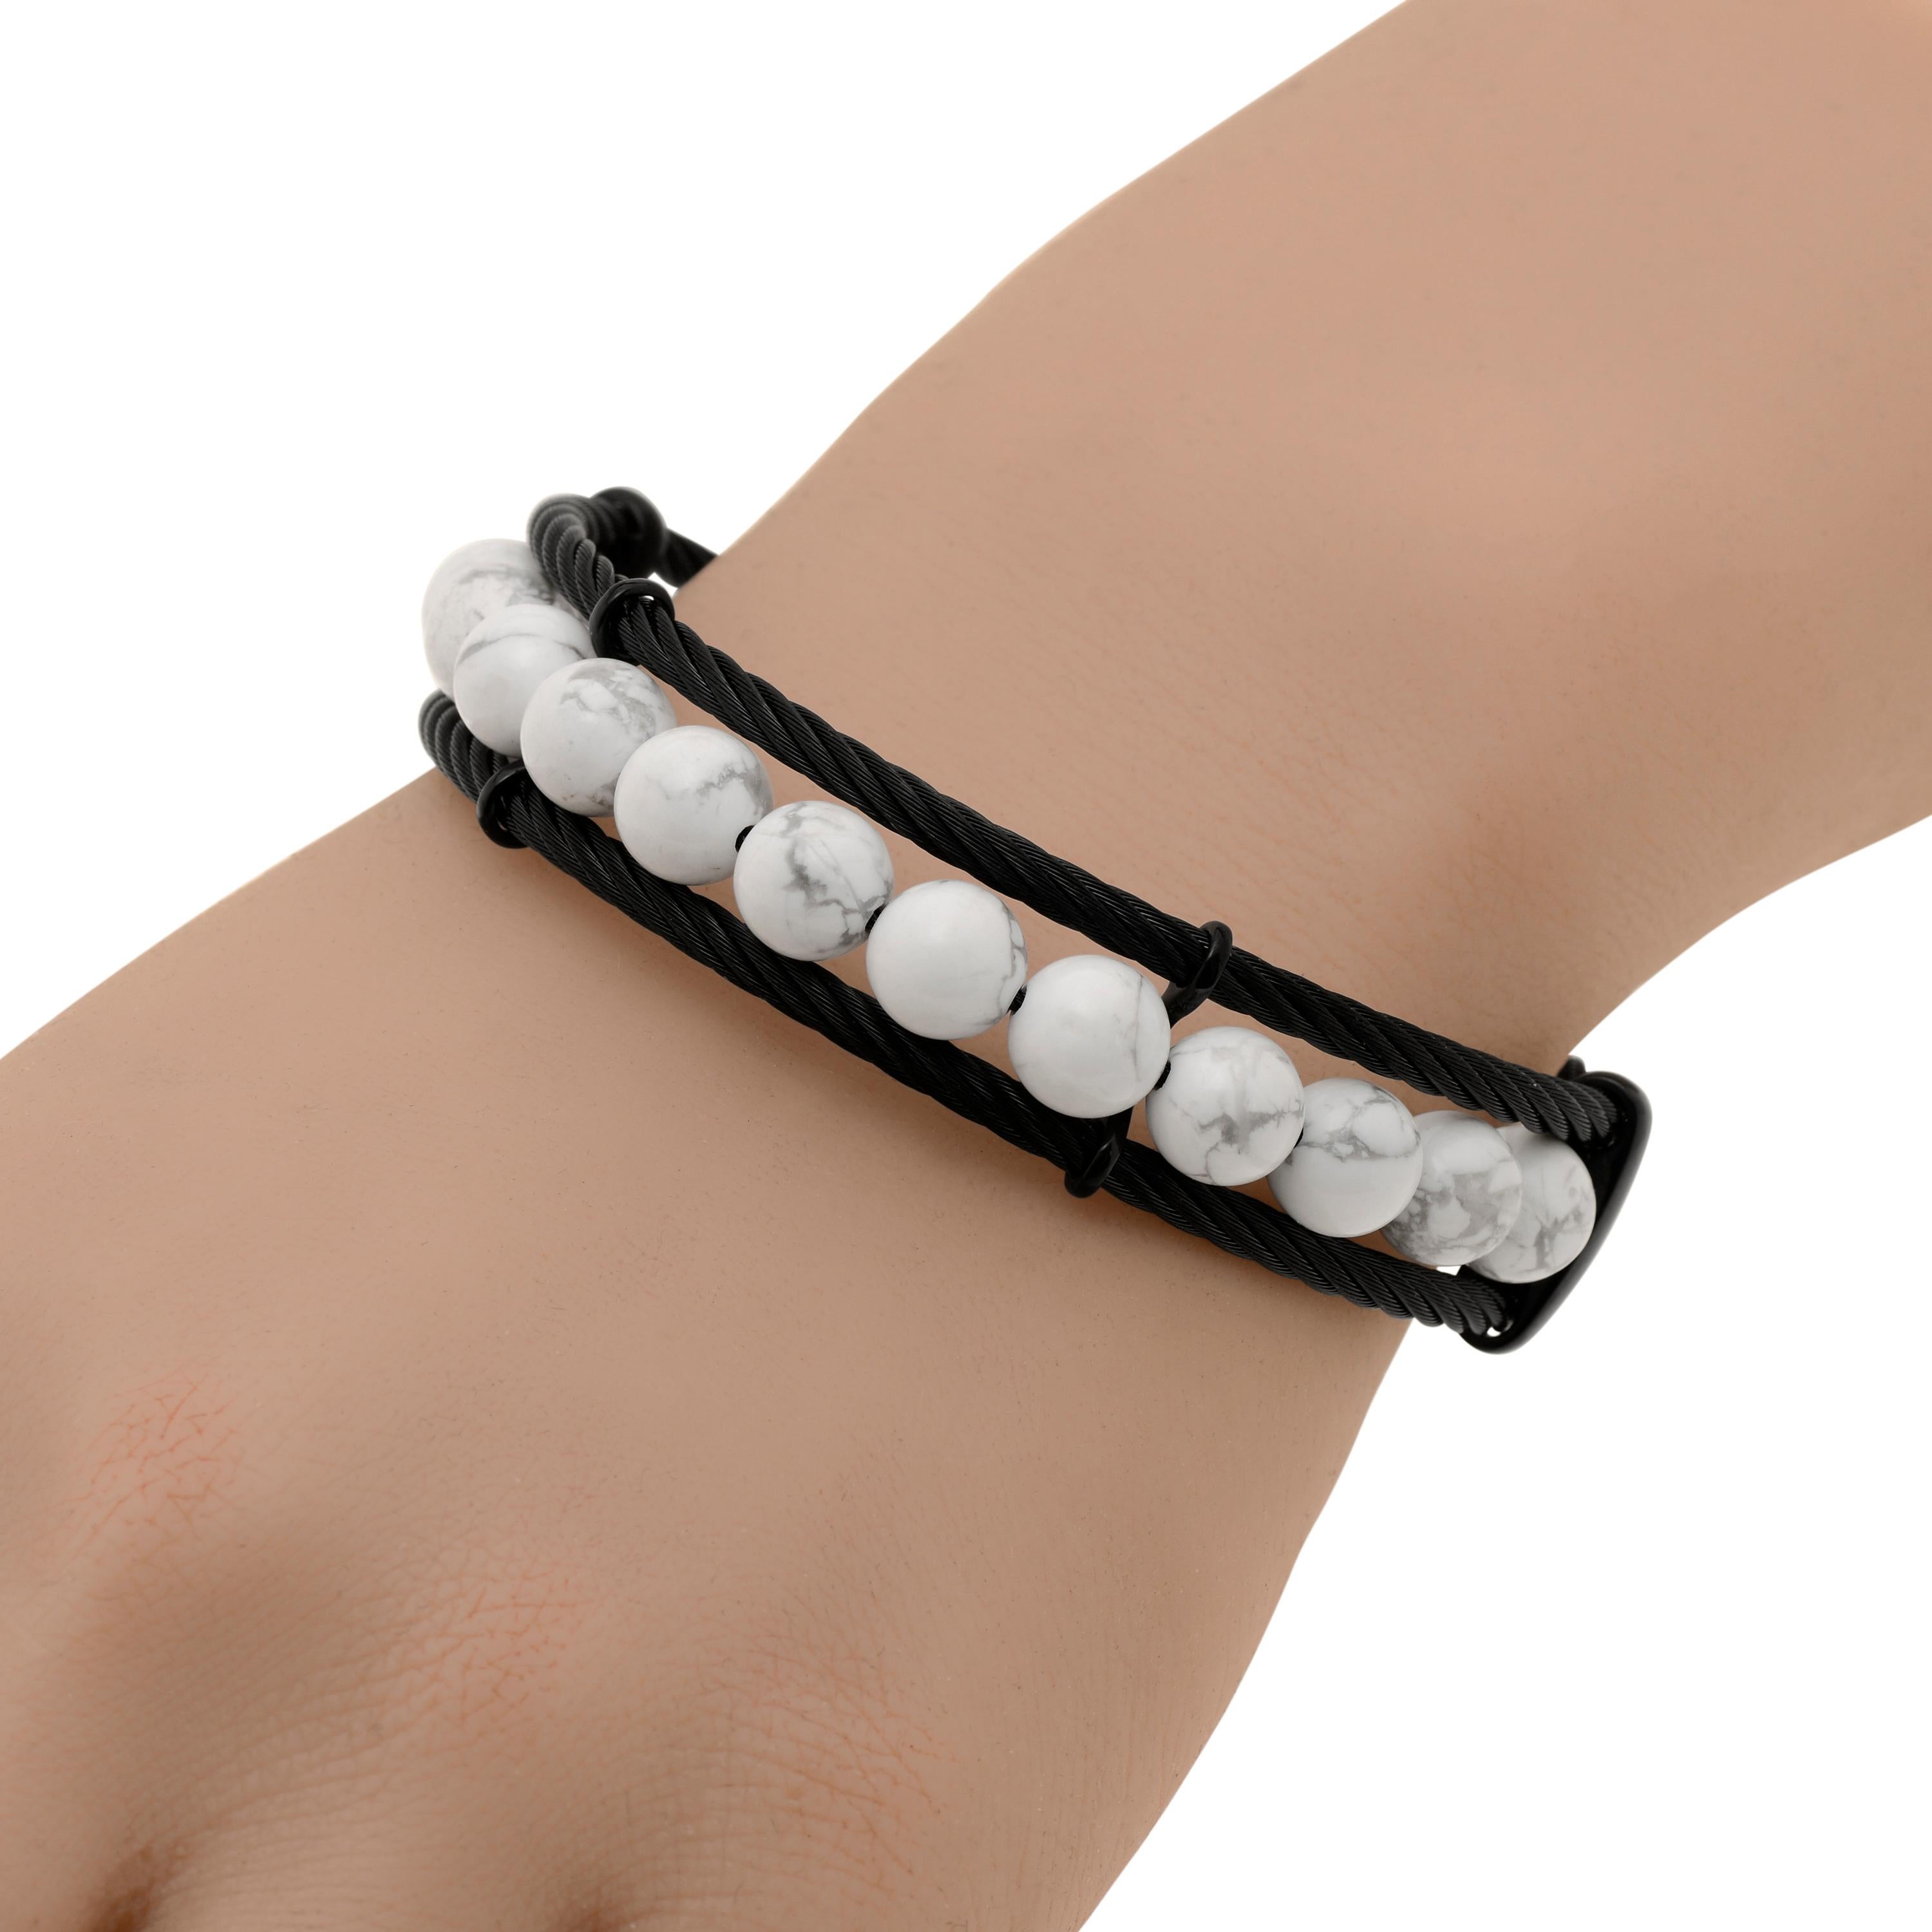 Alor stainless steel cable bracelet features two layers of black cable centered with howlite beads. The band width is 1/2